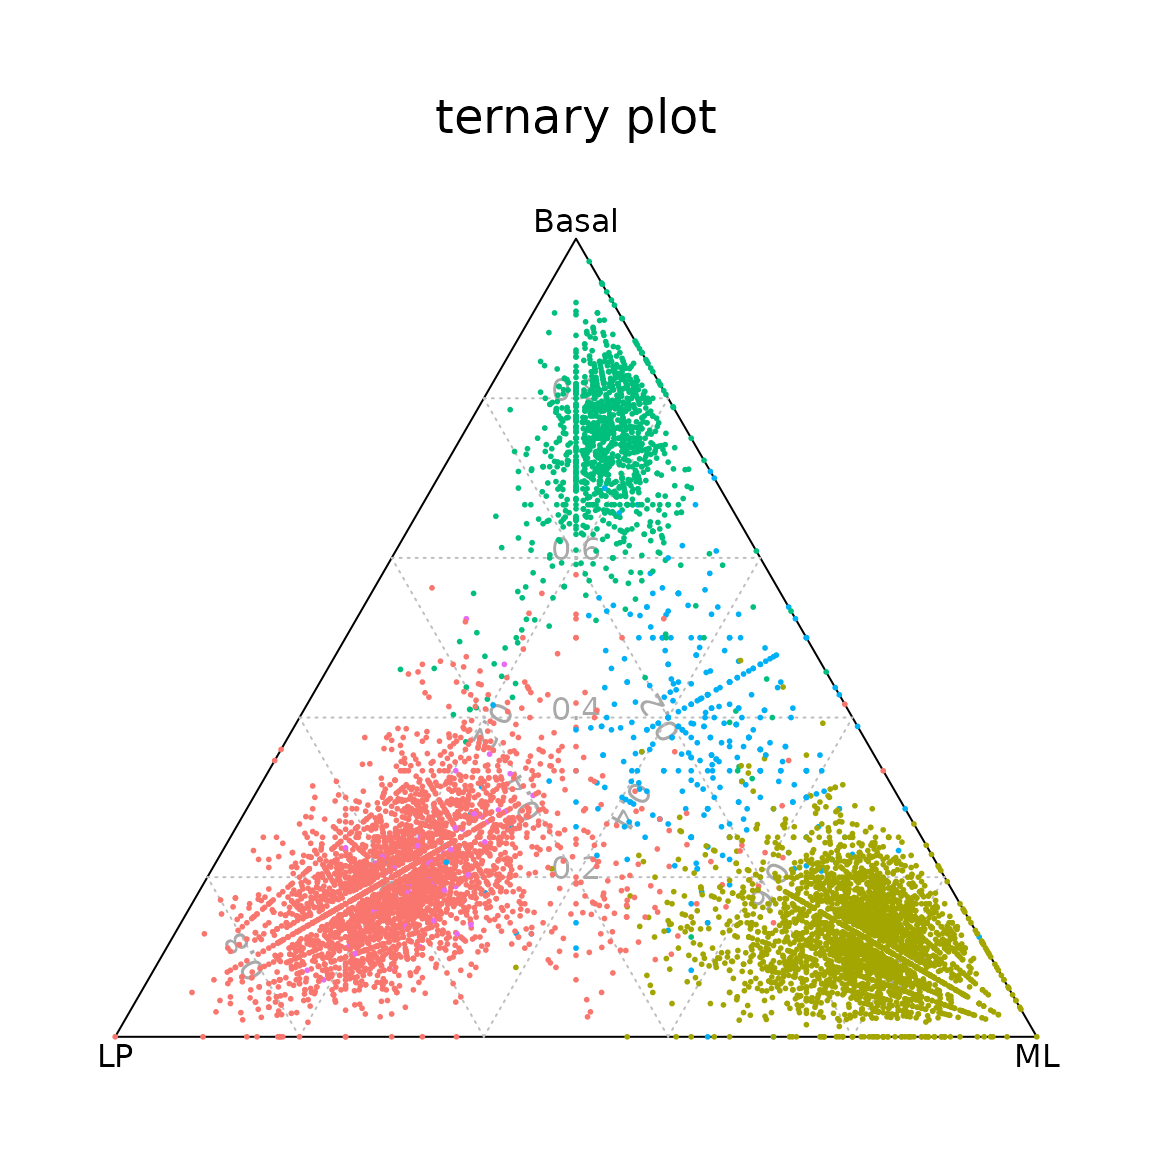 Ternary plot positioning each cell according to the proportion of basal, LP, or ML signature genes expressed by that cell.